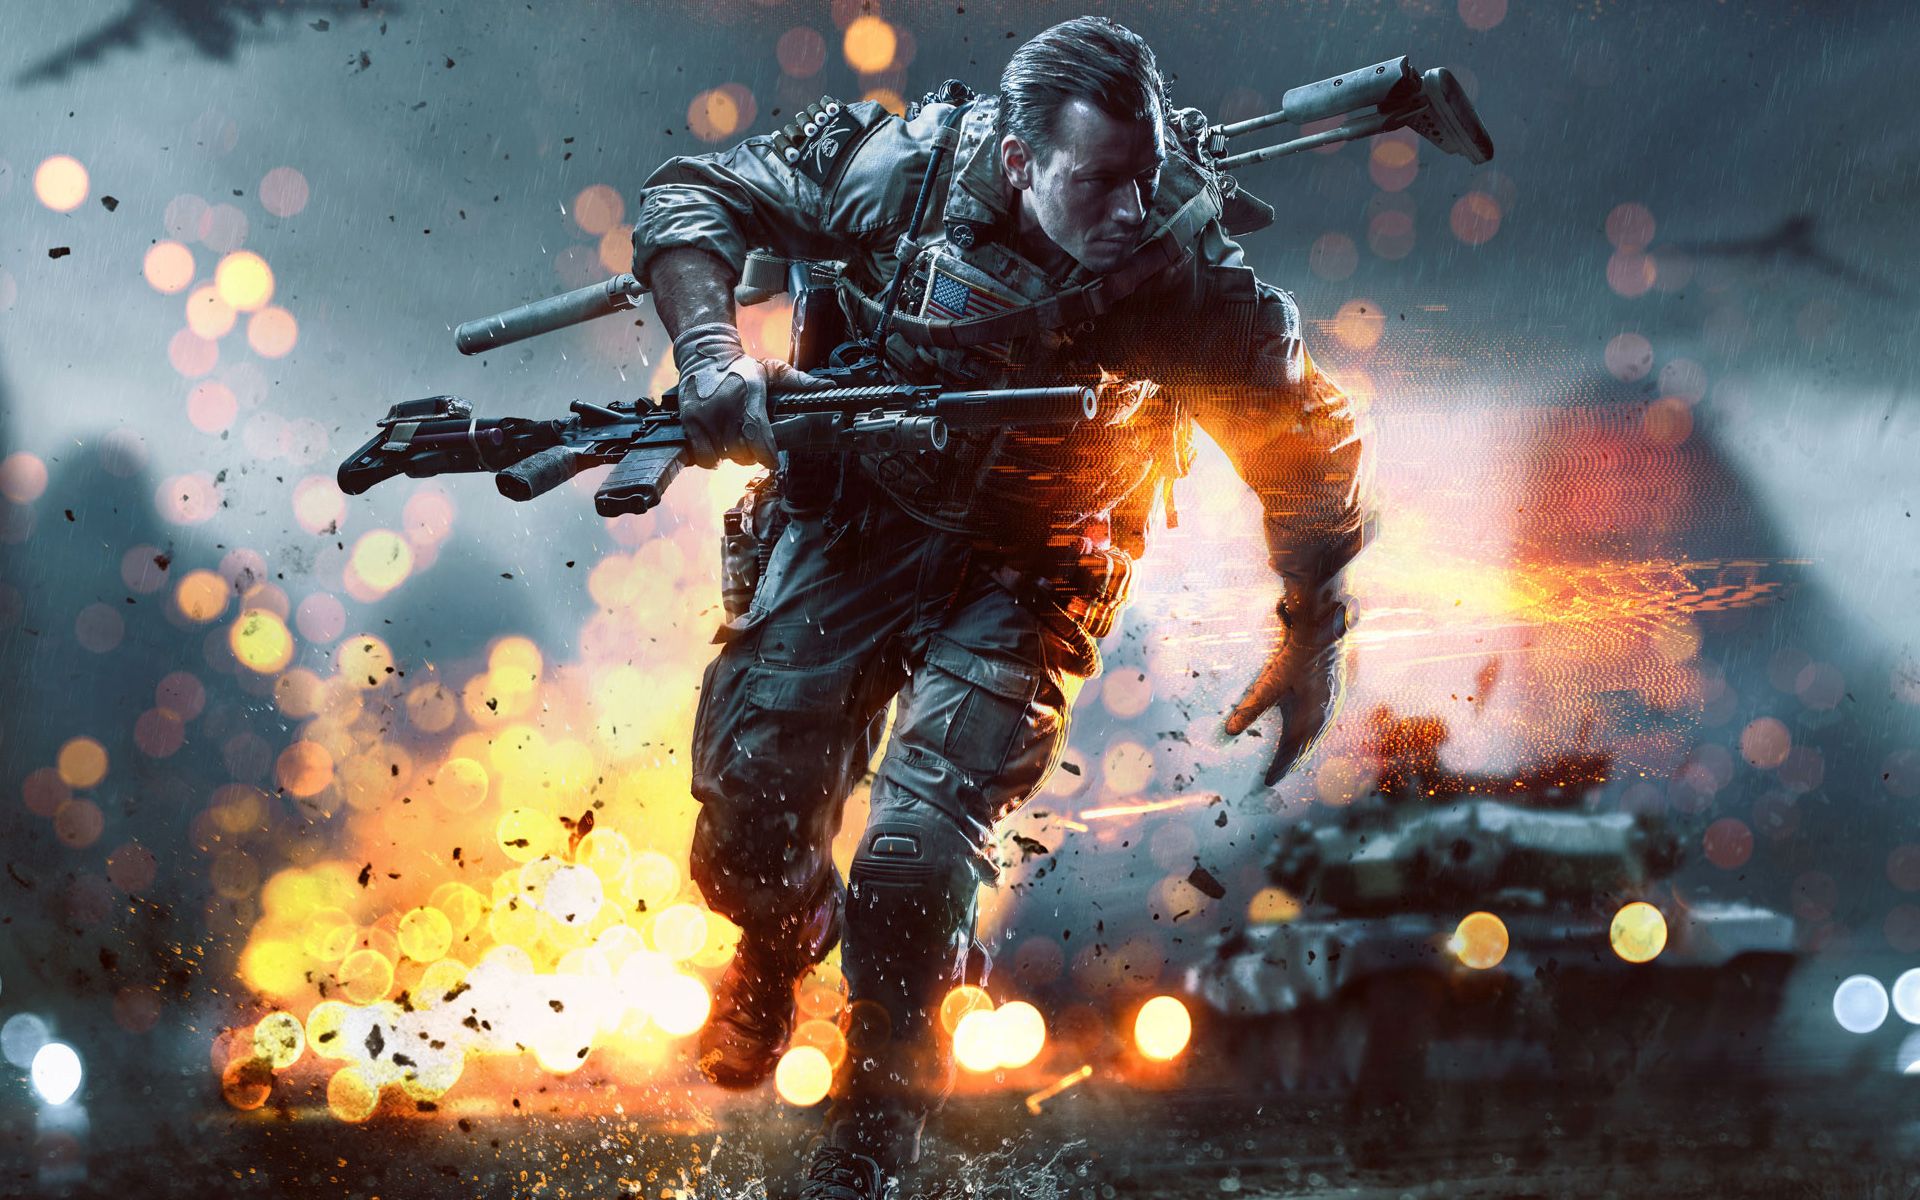 Battlefield 4 - Xbox 360 Gets a Day One Patch, DICE 'Strongly Advises' You  Download It - MP1st